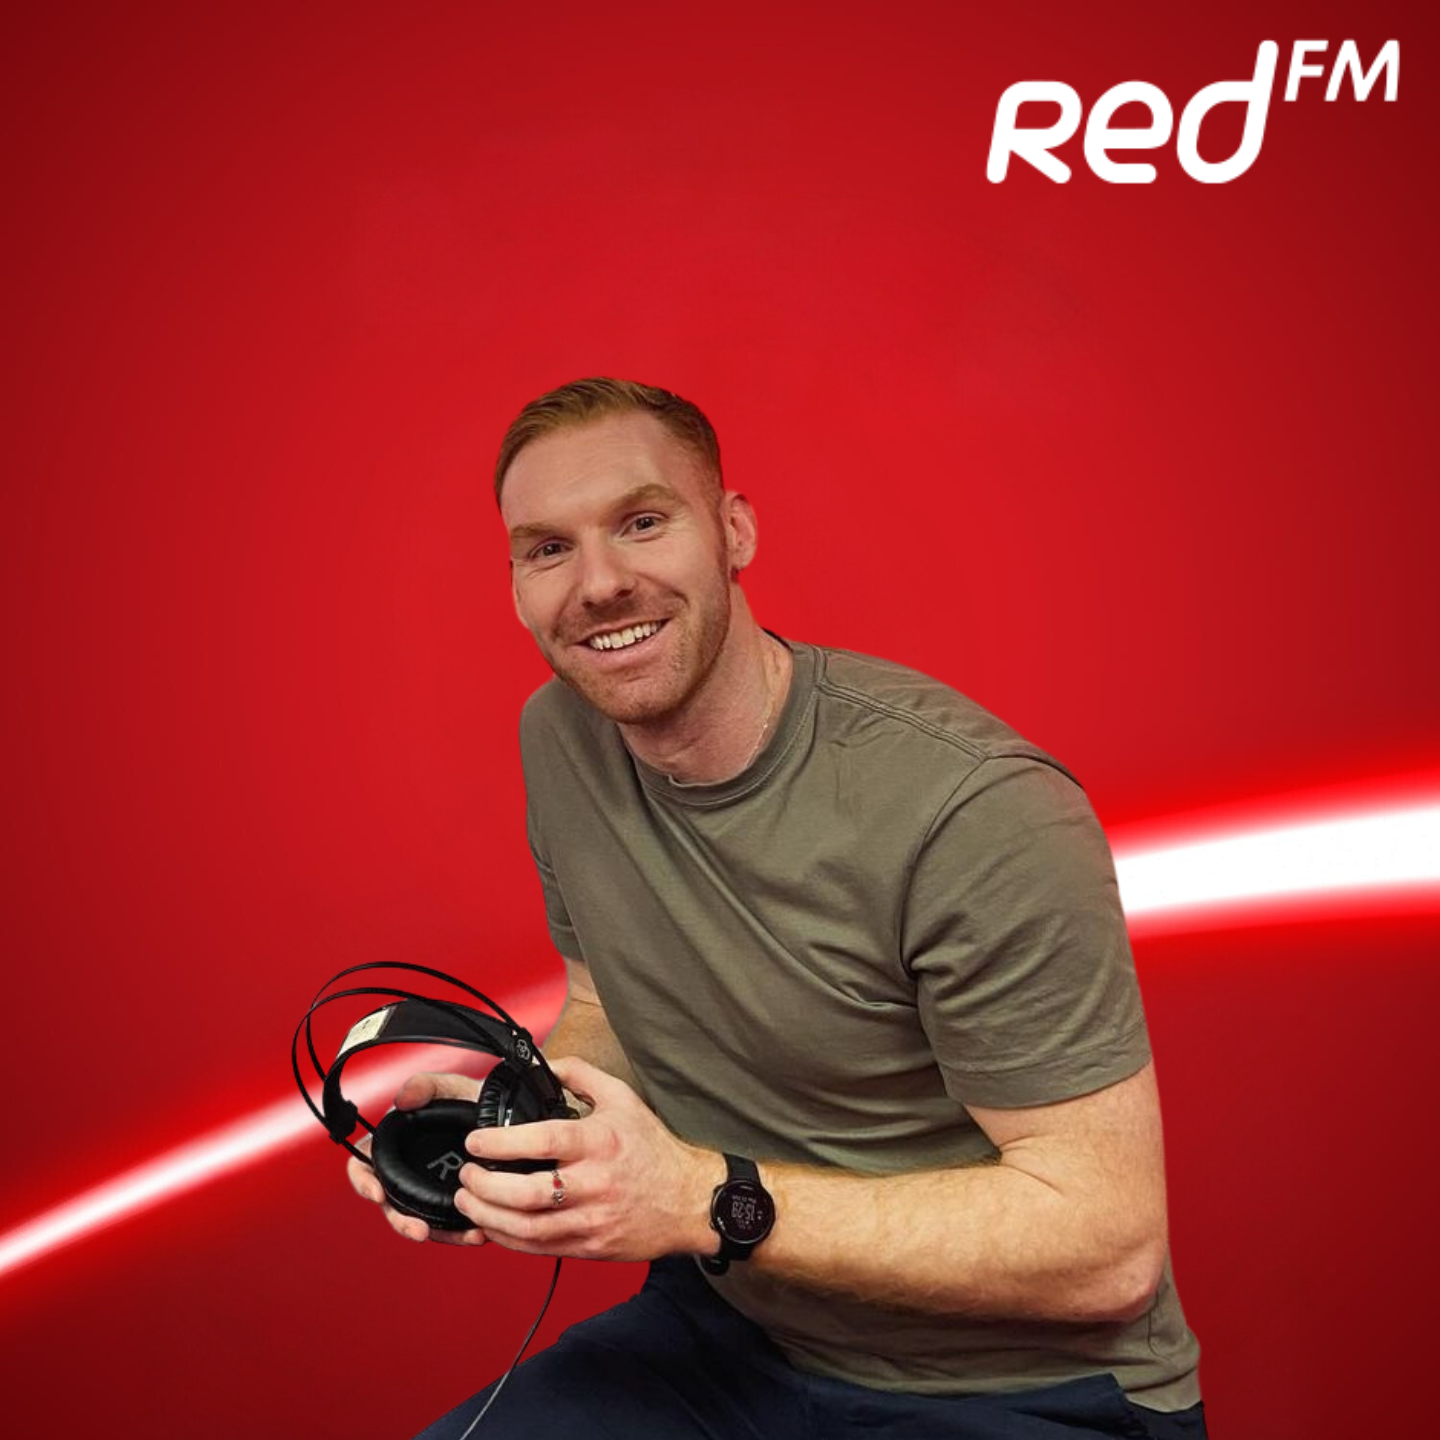 Cathal Minogue on Red FM